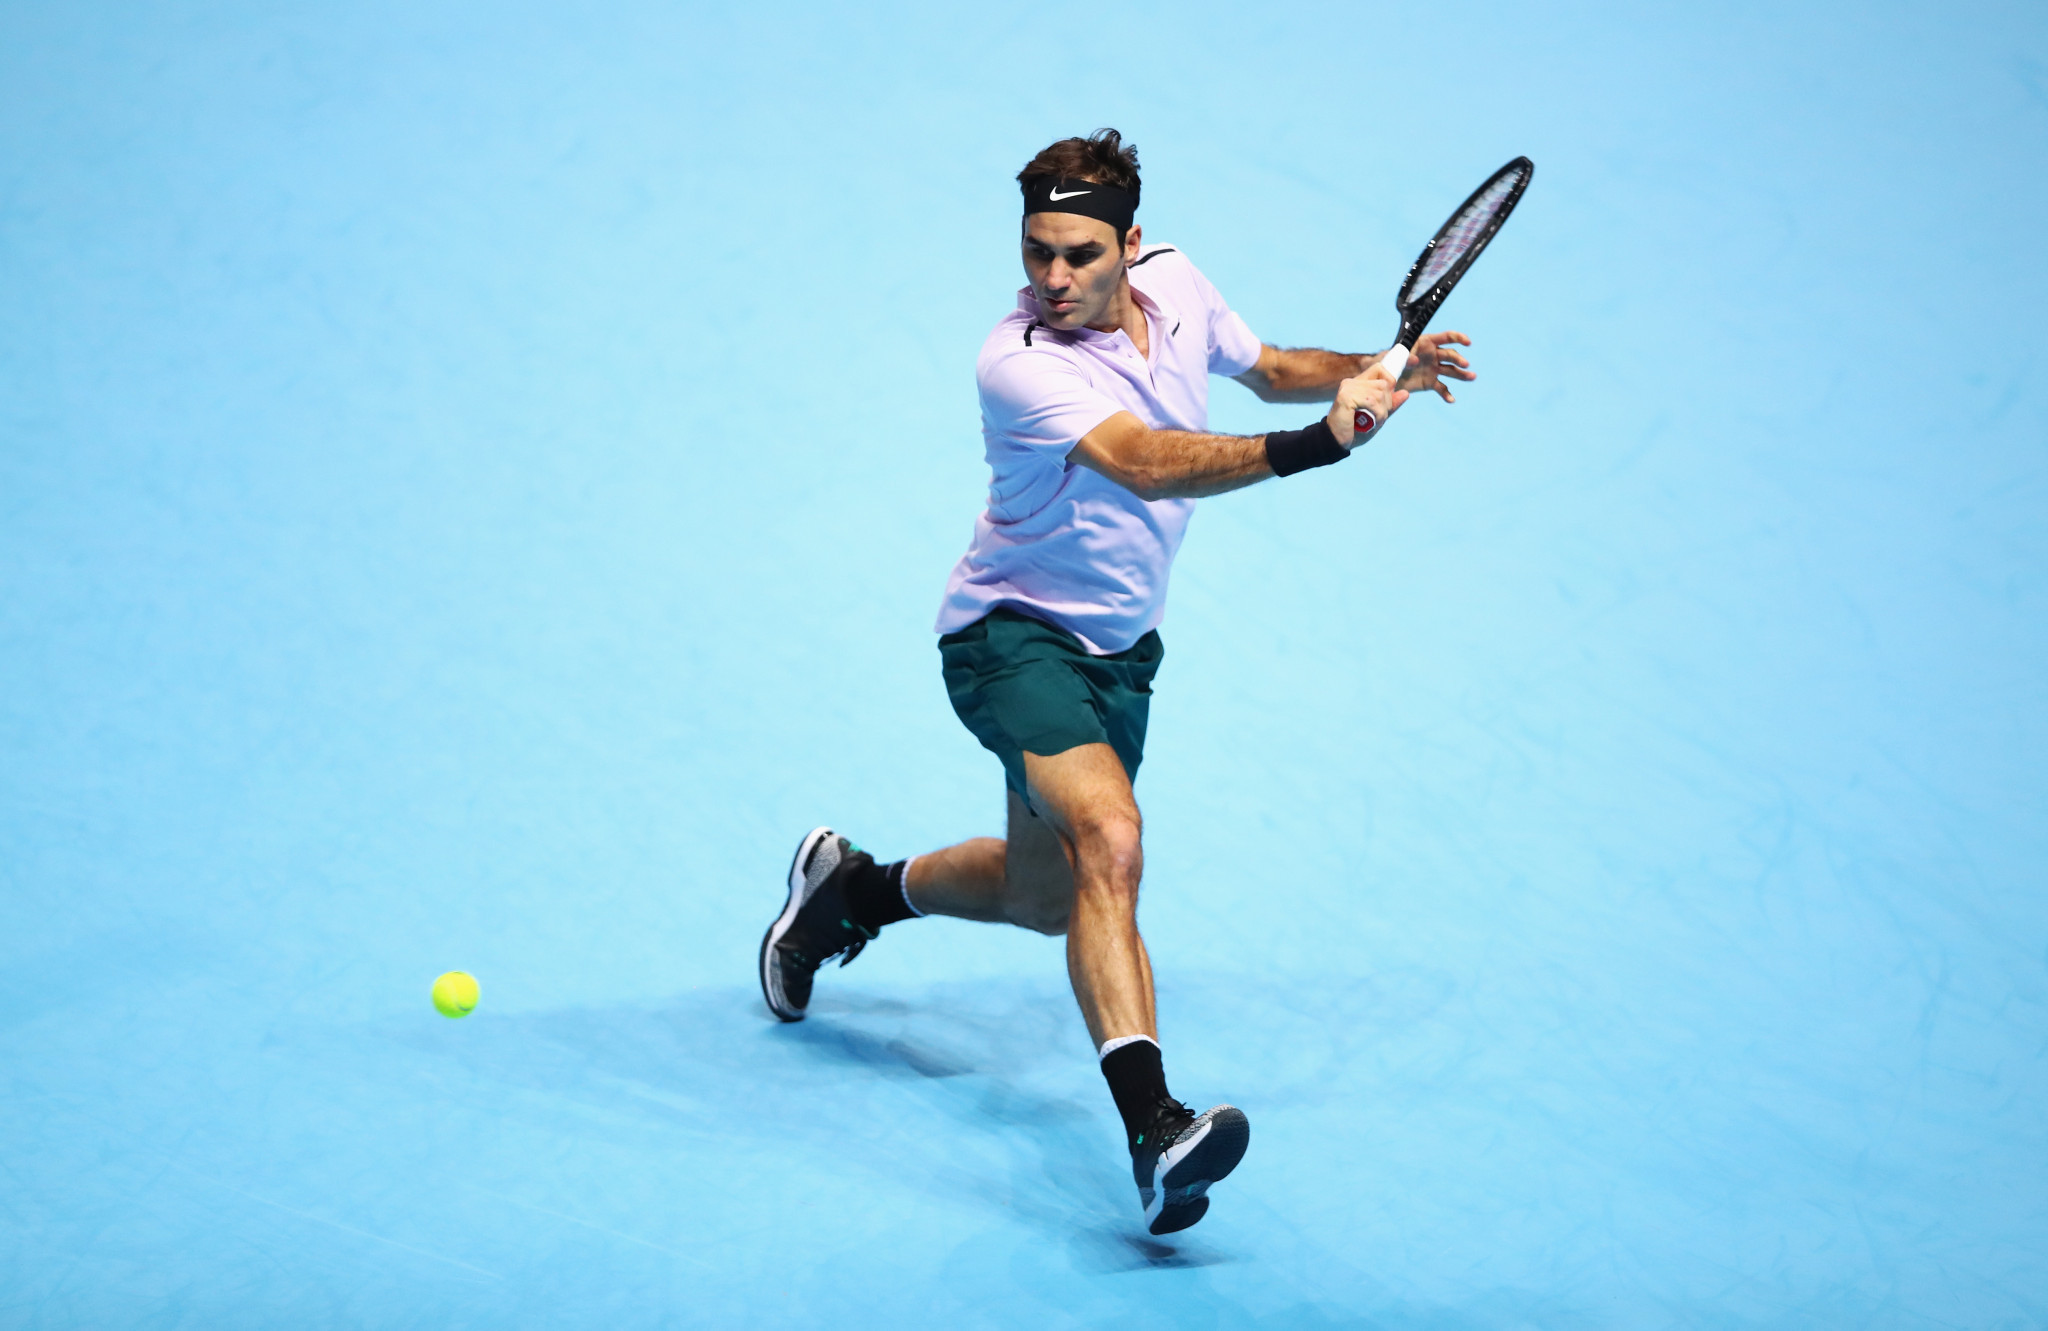 Federer hits back to beat Cilic at ATP World Tour Finals as Sock advances